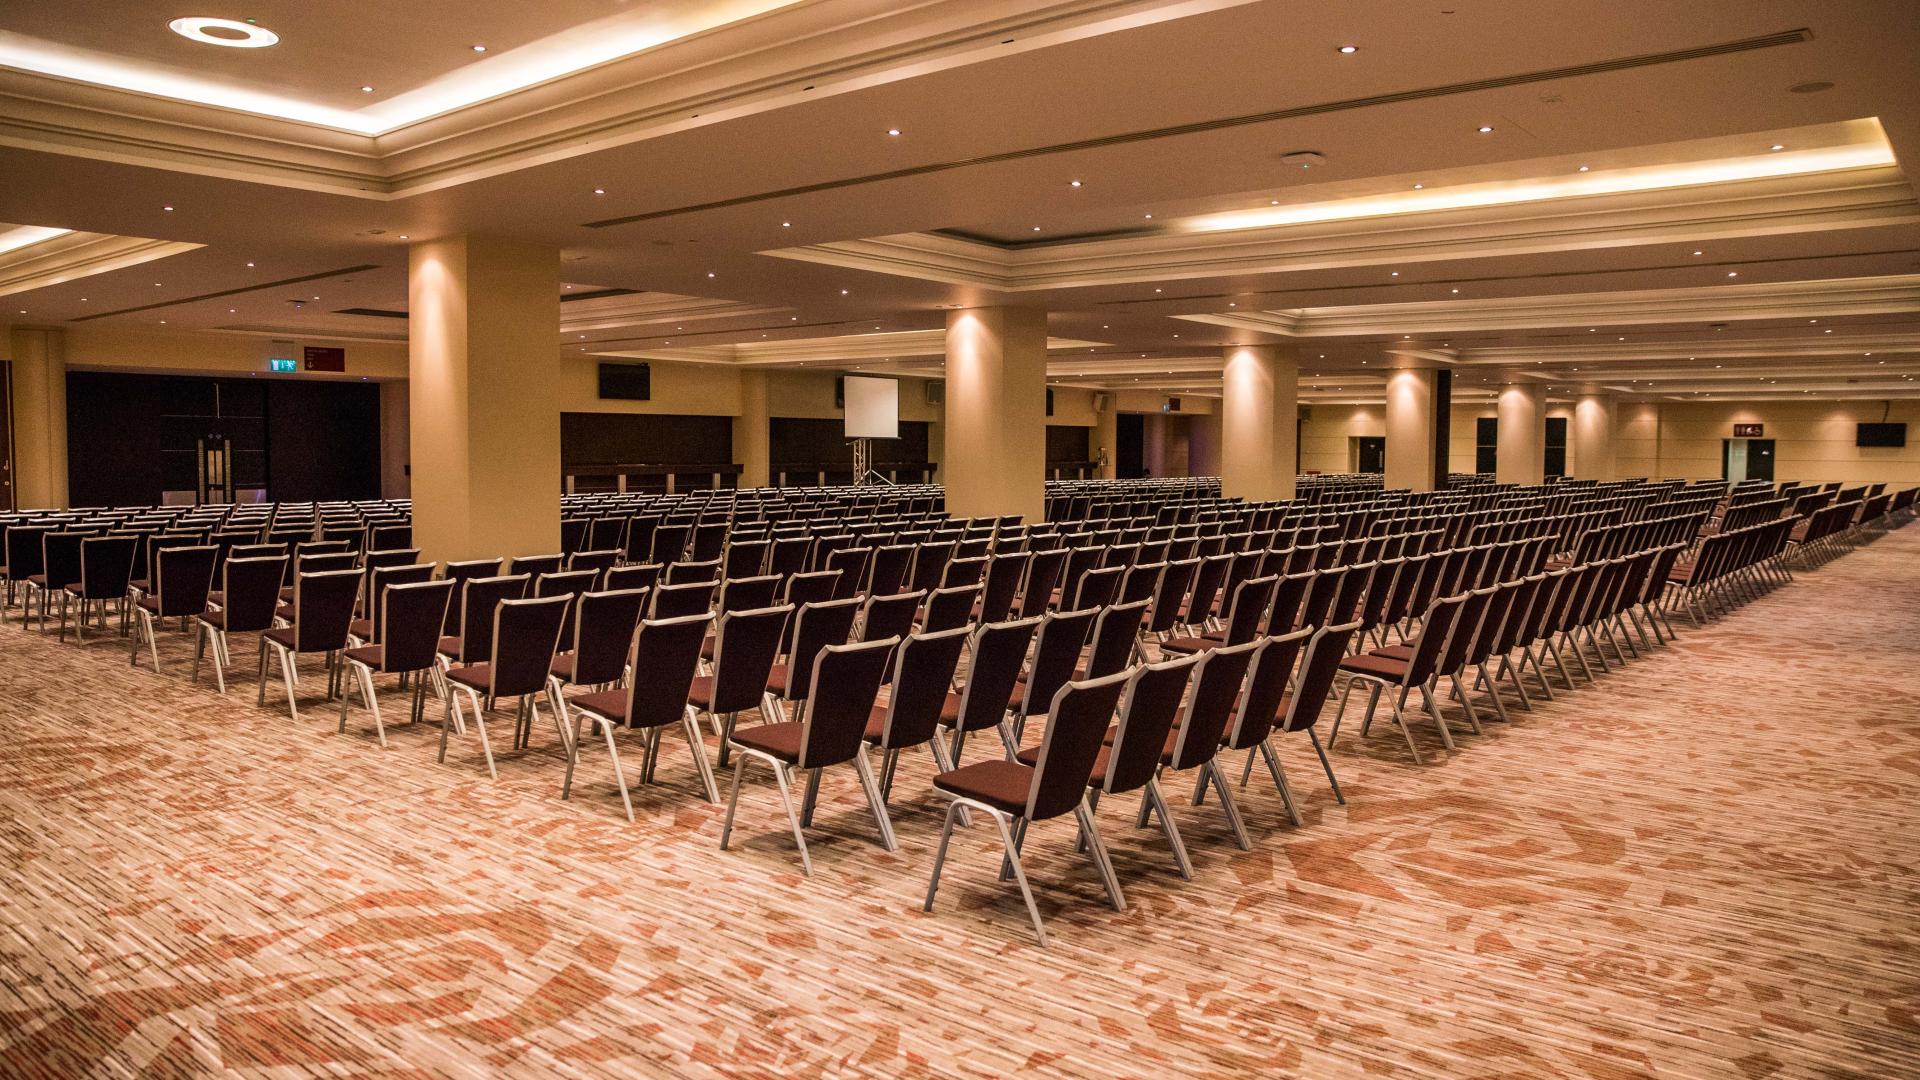 Conference Venues for Hire near Heathrow